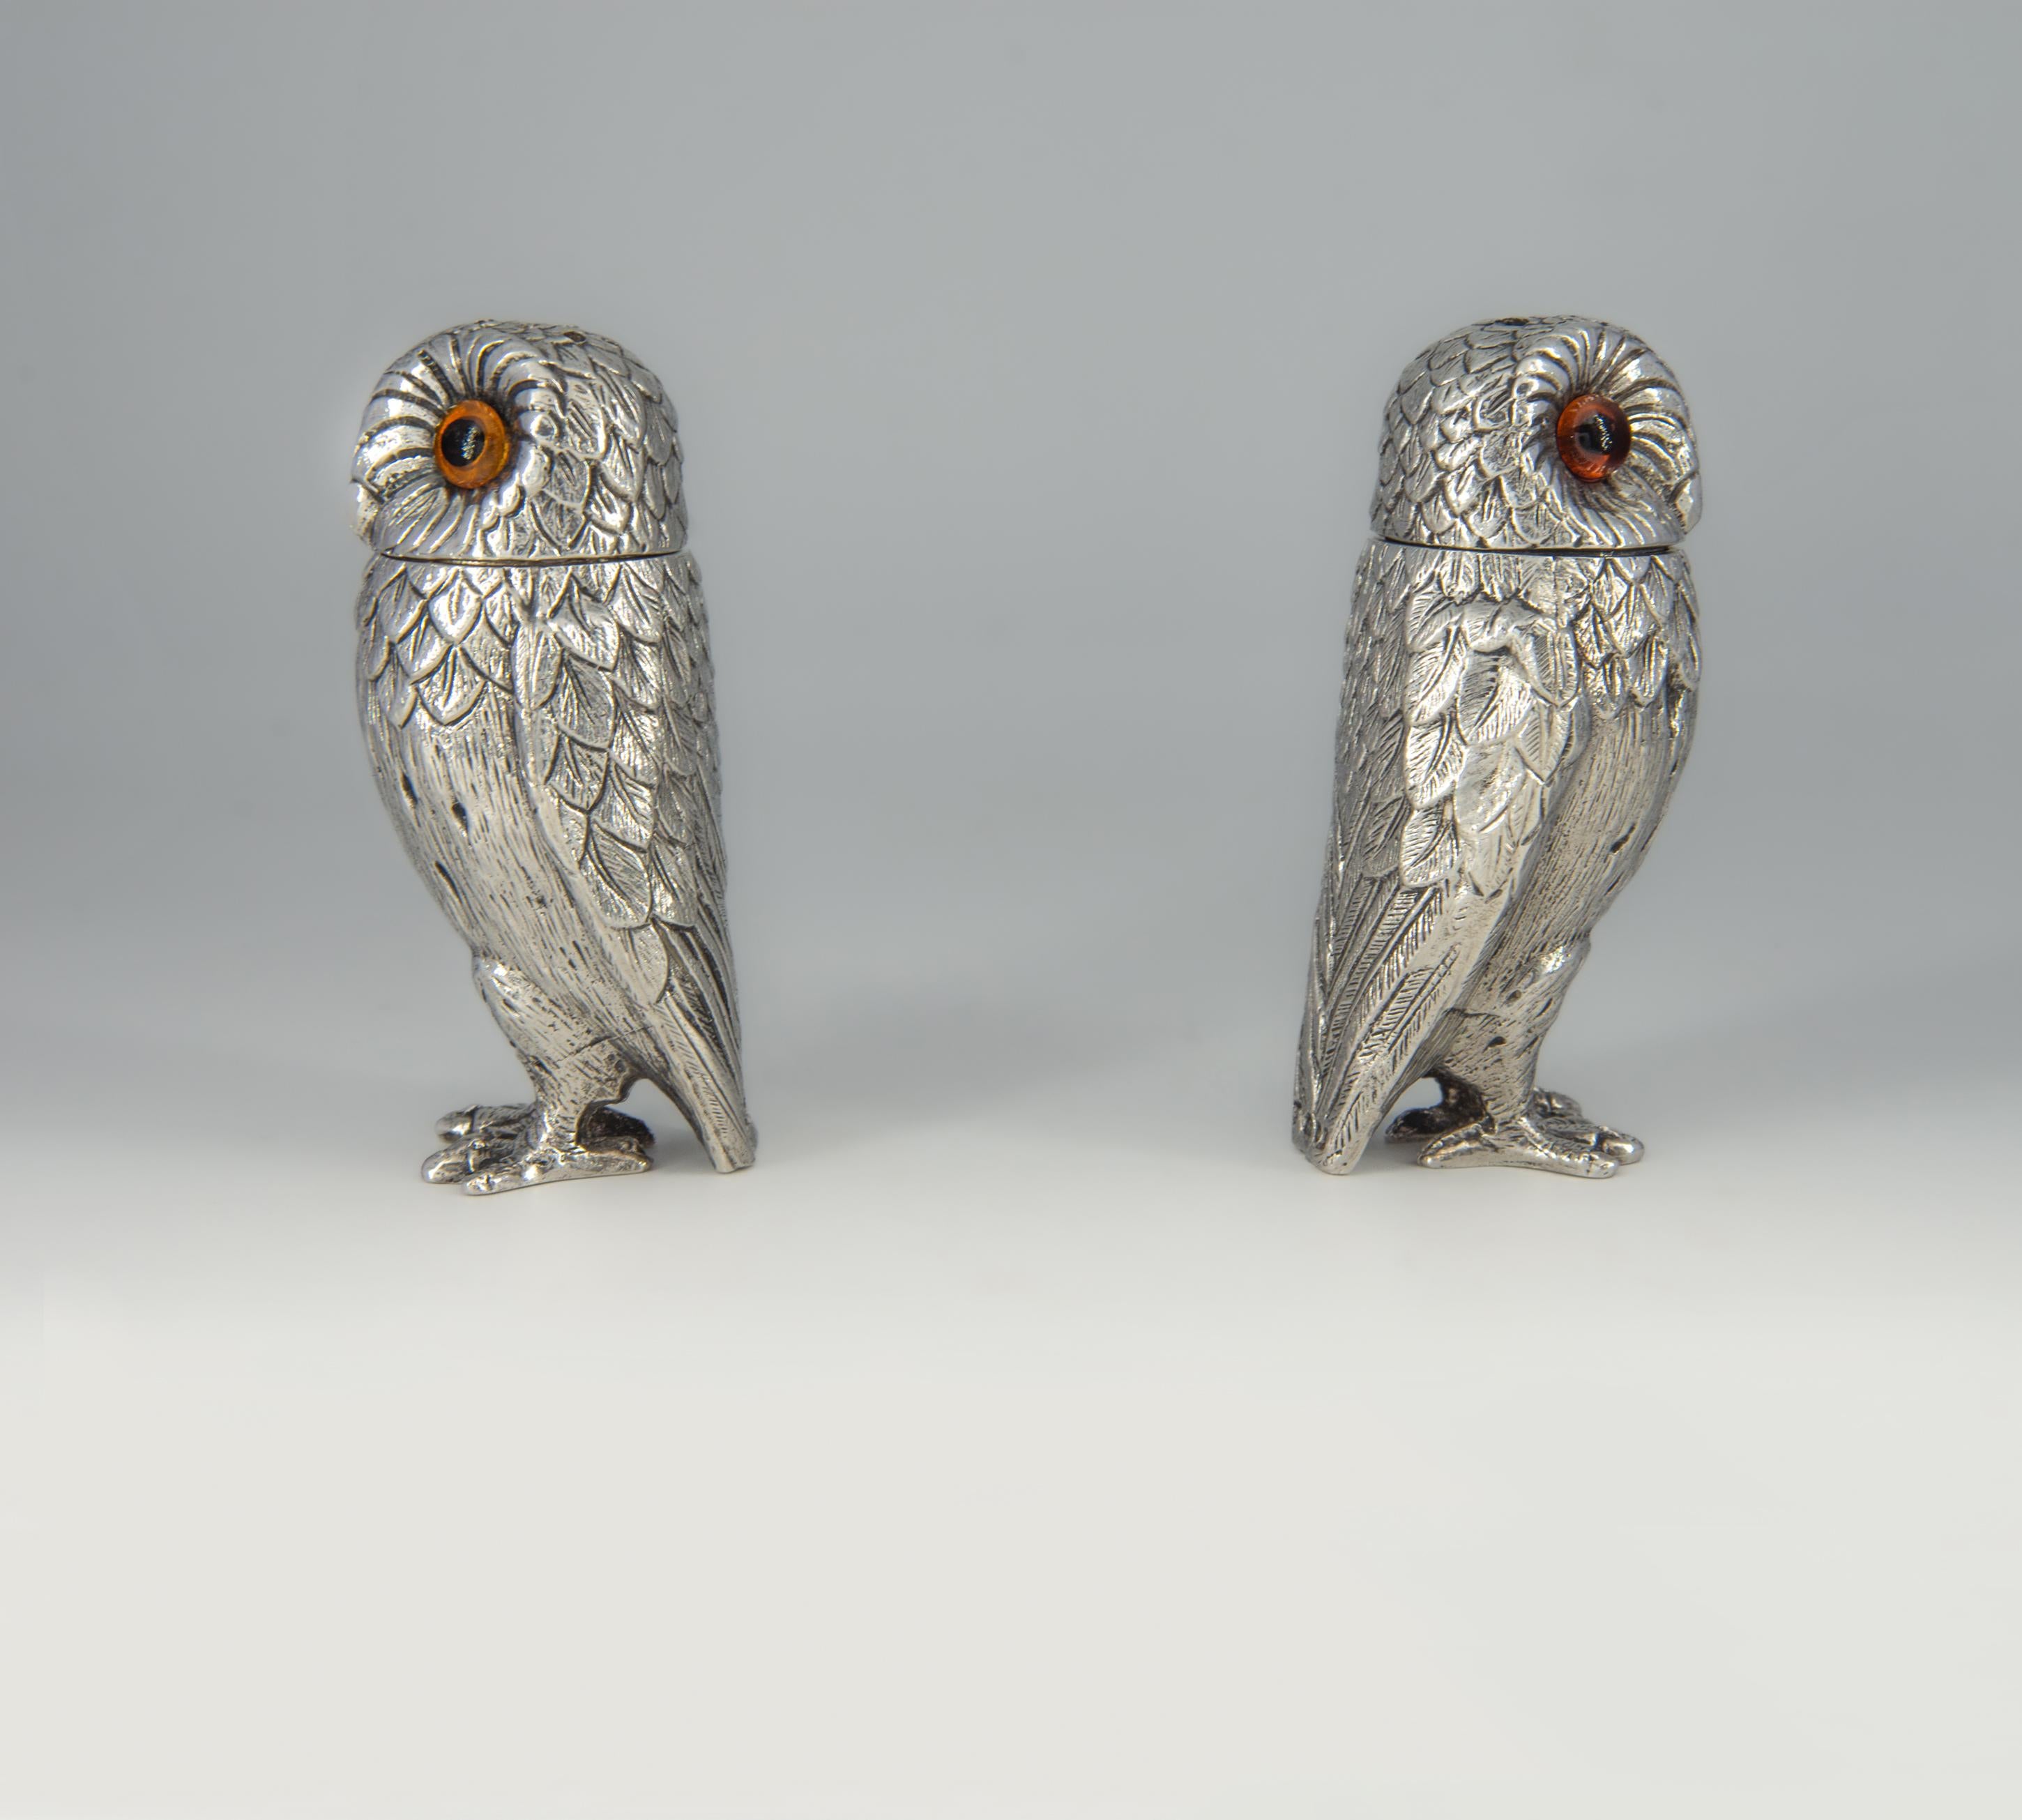 Impressive hallmarked sterling silver Elizabeth II English owl salt and pepper set, made by Richard Comyns - London 1960.

Modelled as standing owls with wonderful detailed plumage, very finely cast, and ornamented with original bead eyes.

The